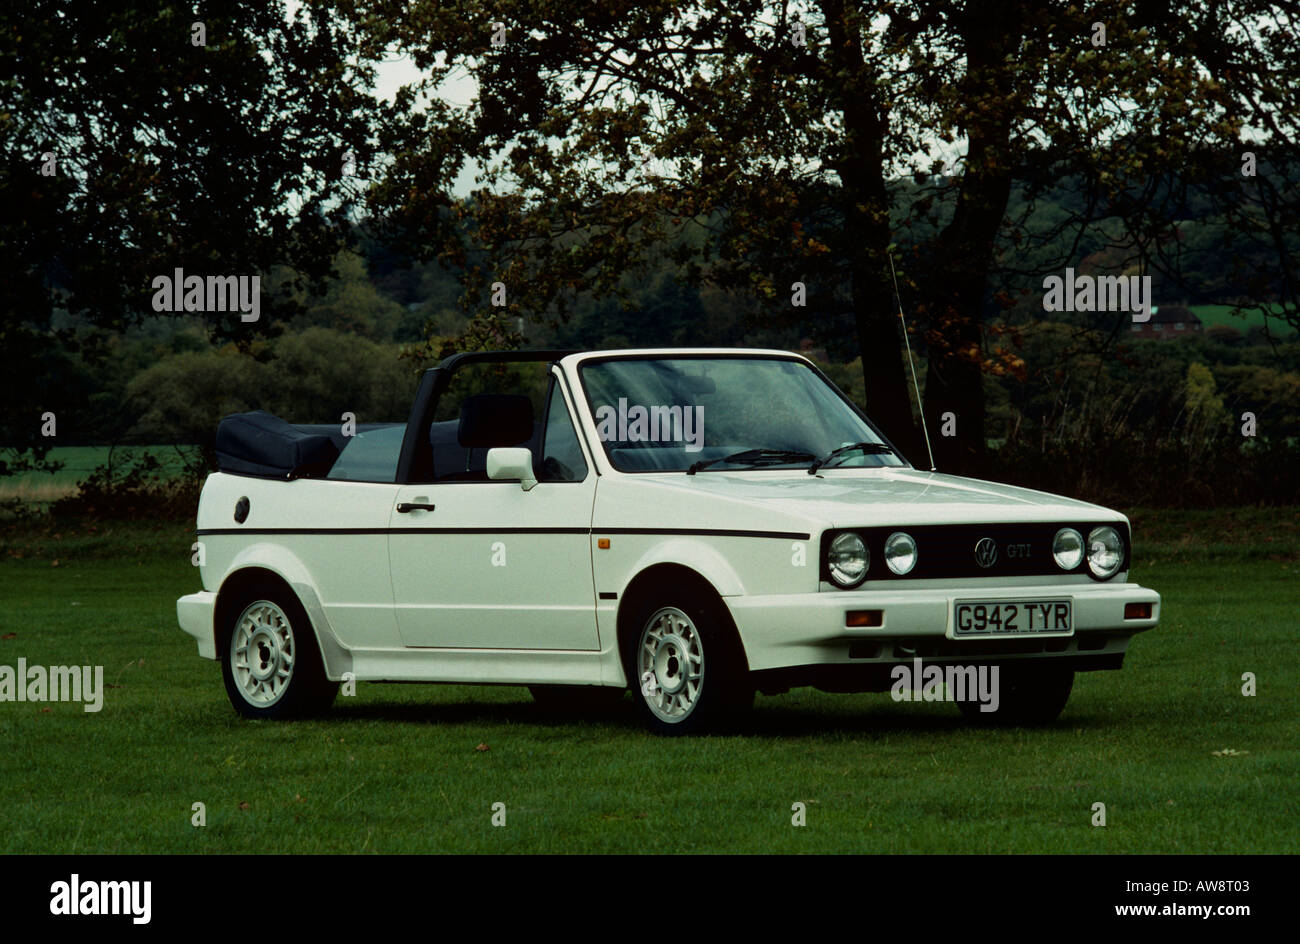 Golf Gti 1980s High Resolution Stock Photography and Images - Alamy